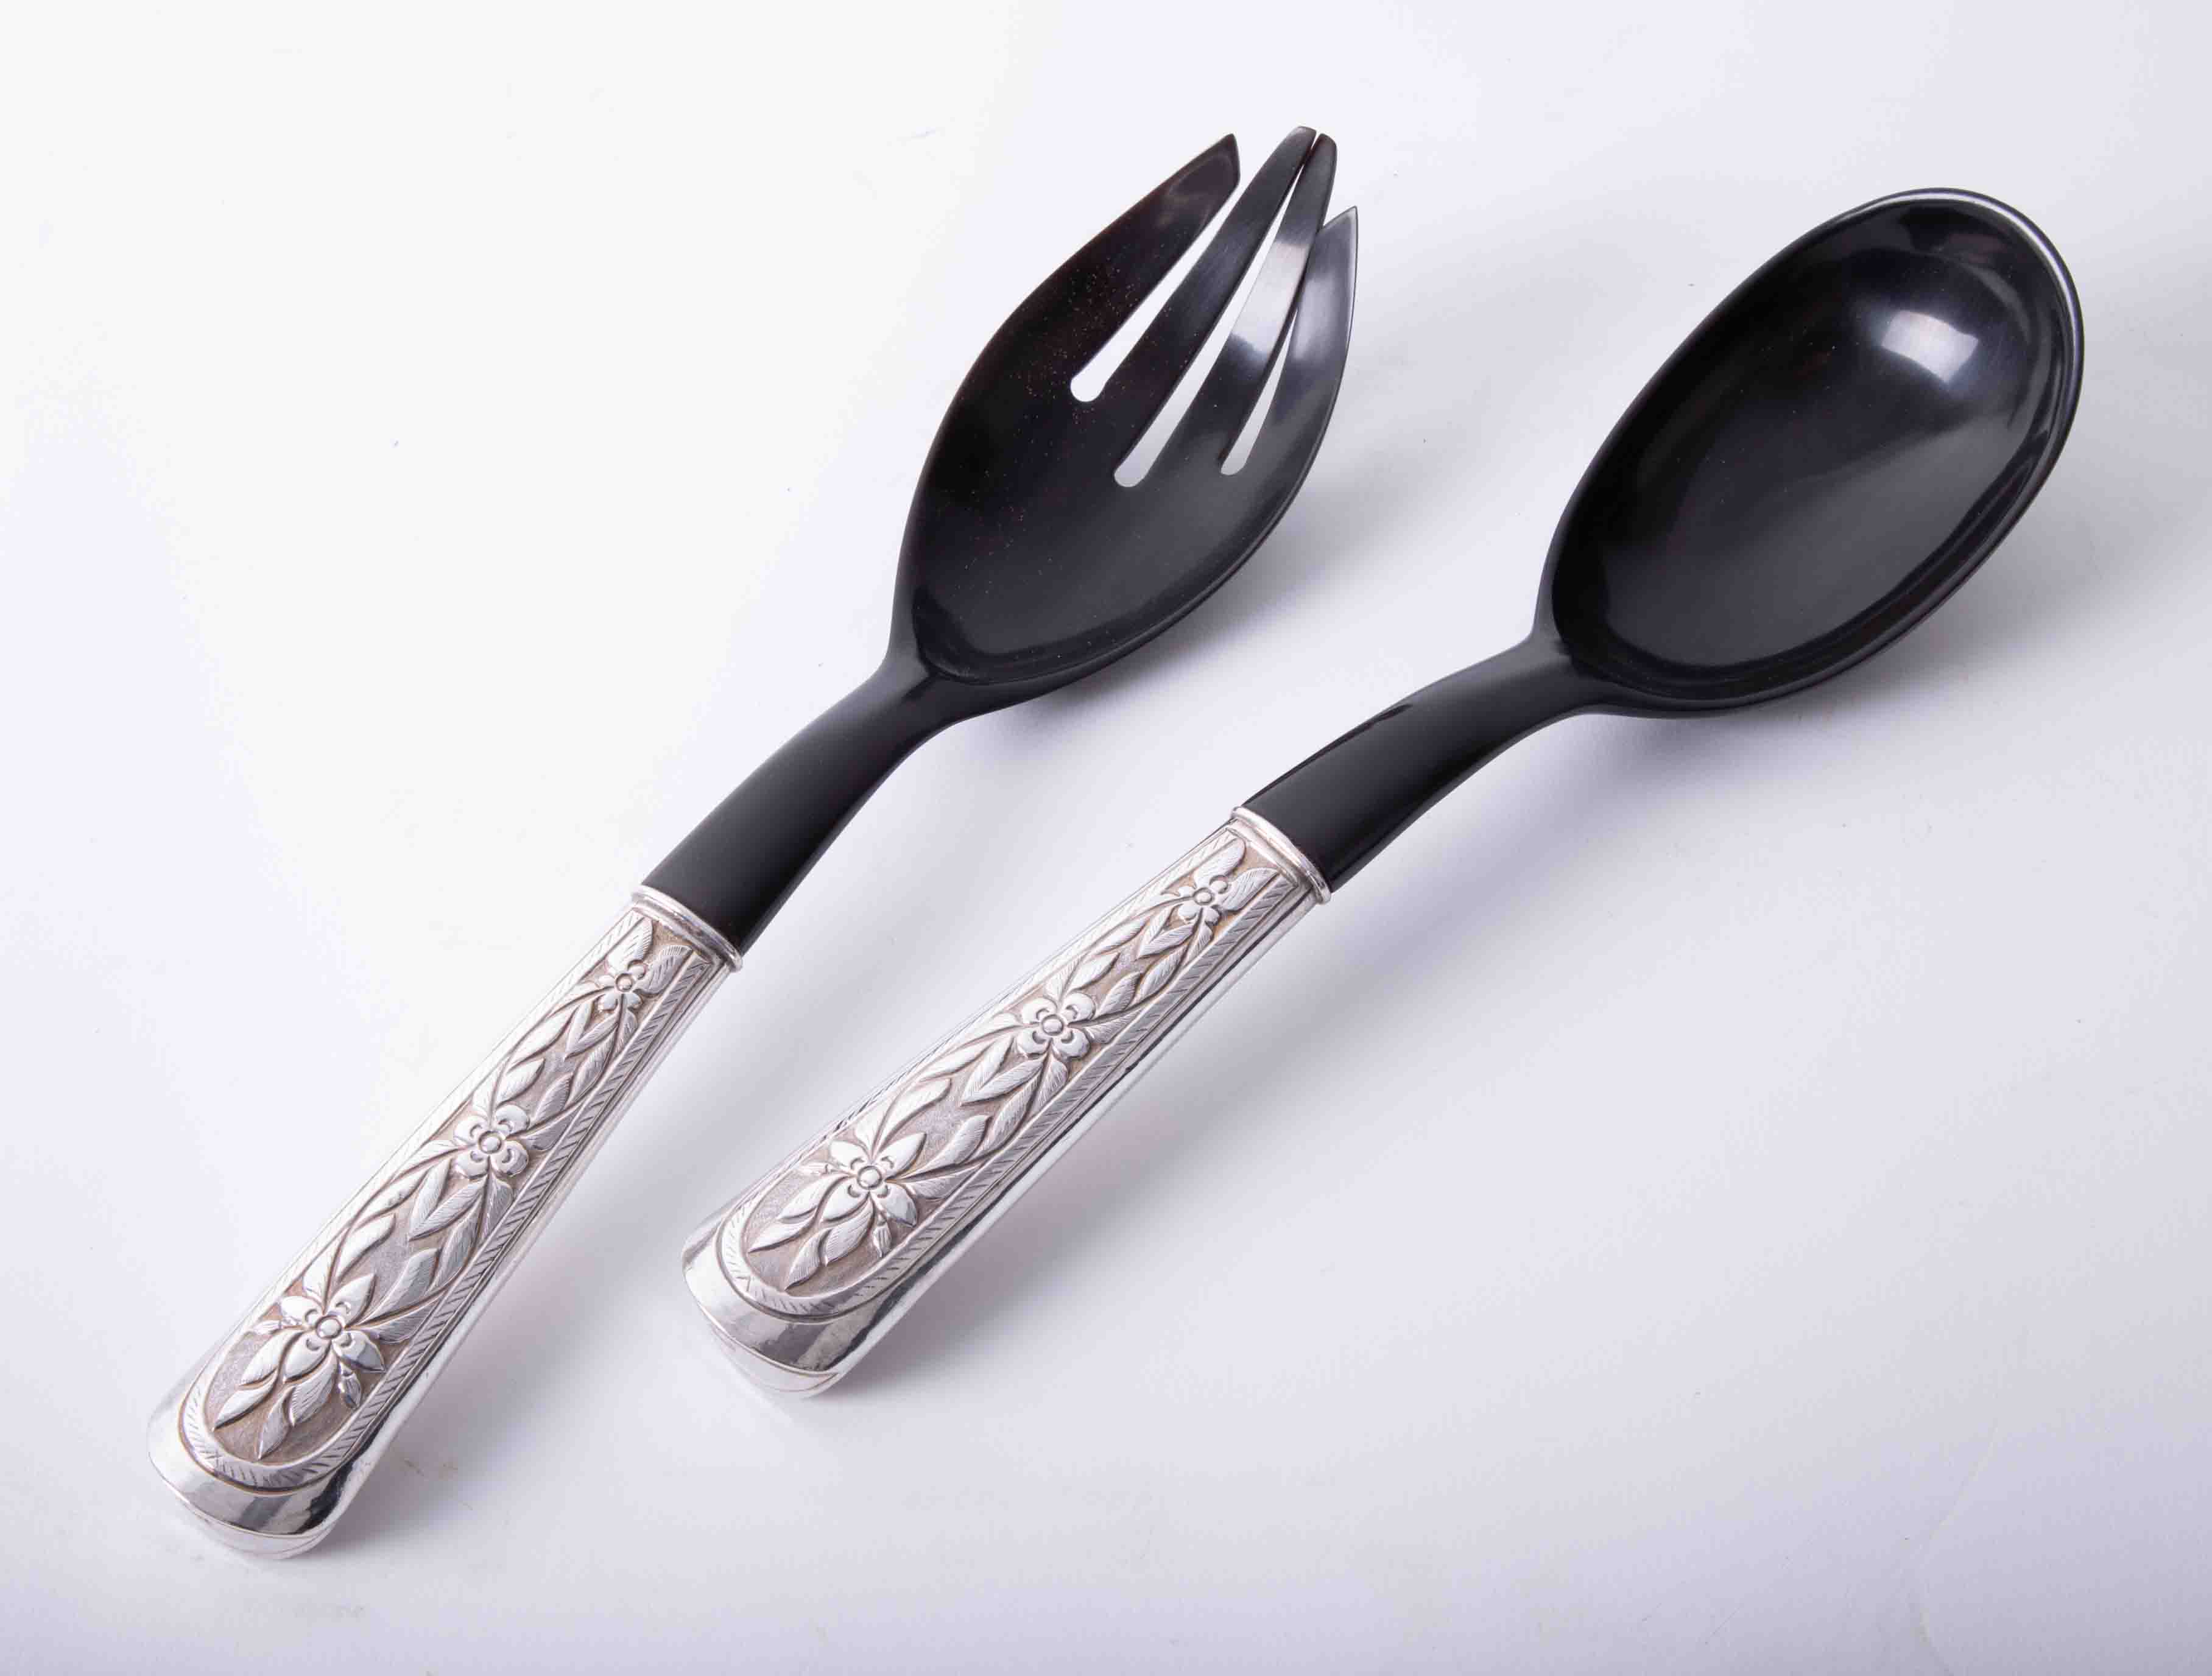 Matched pair of silver handled salad servers, each handle with embossed foliate decoration and